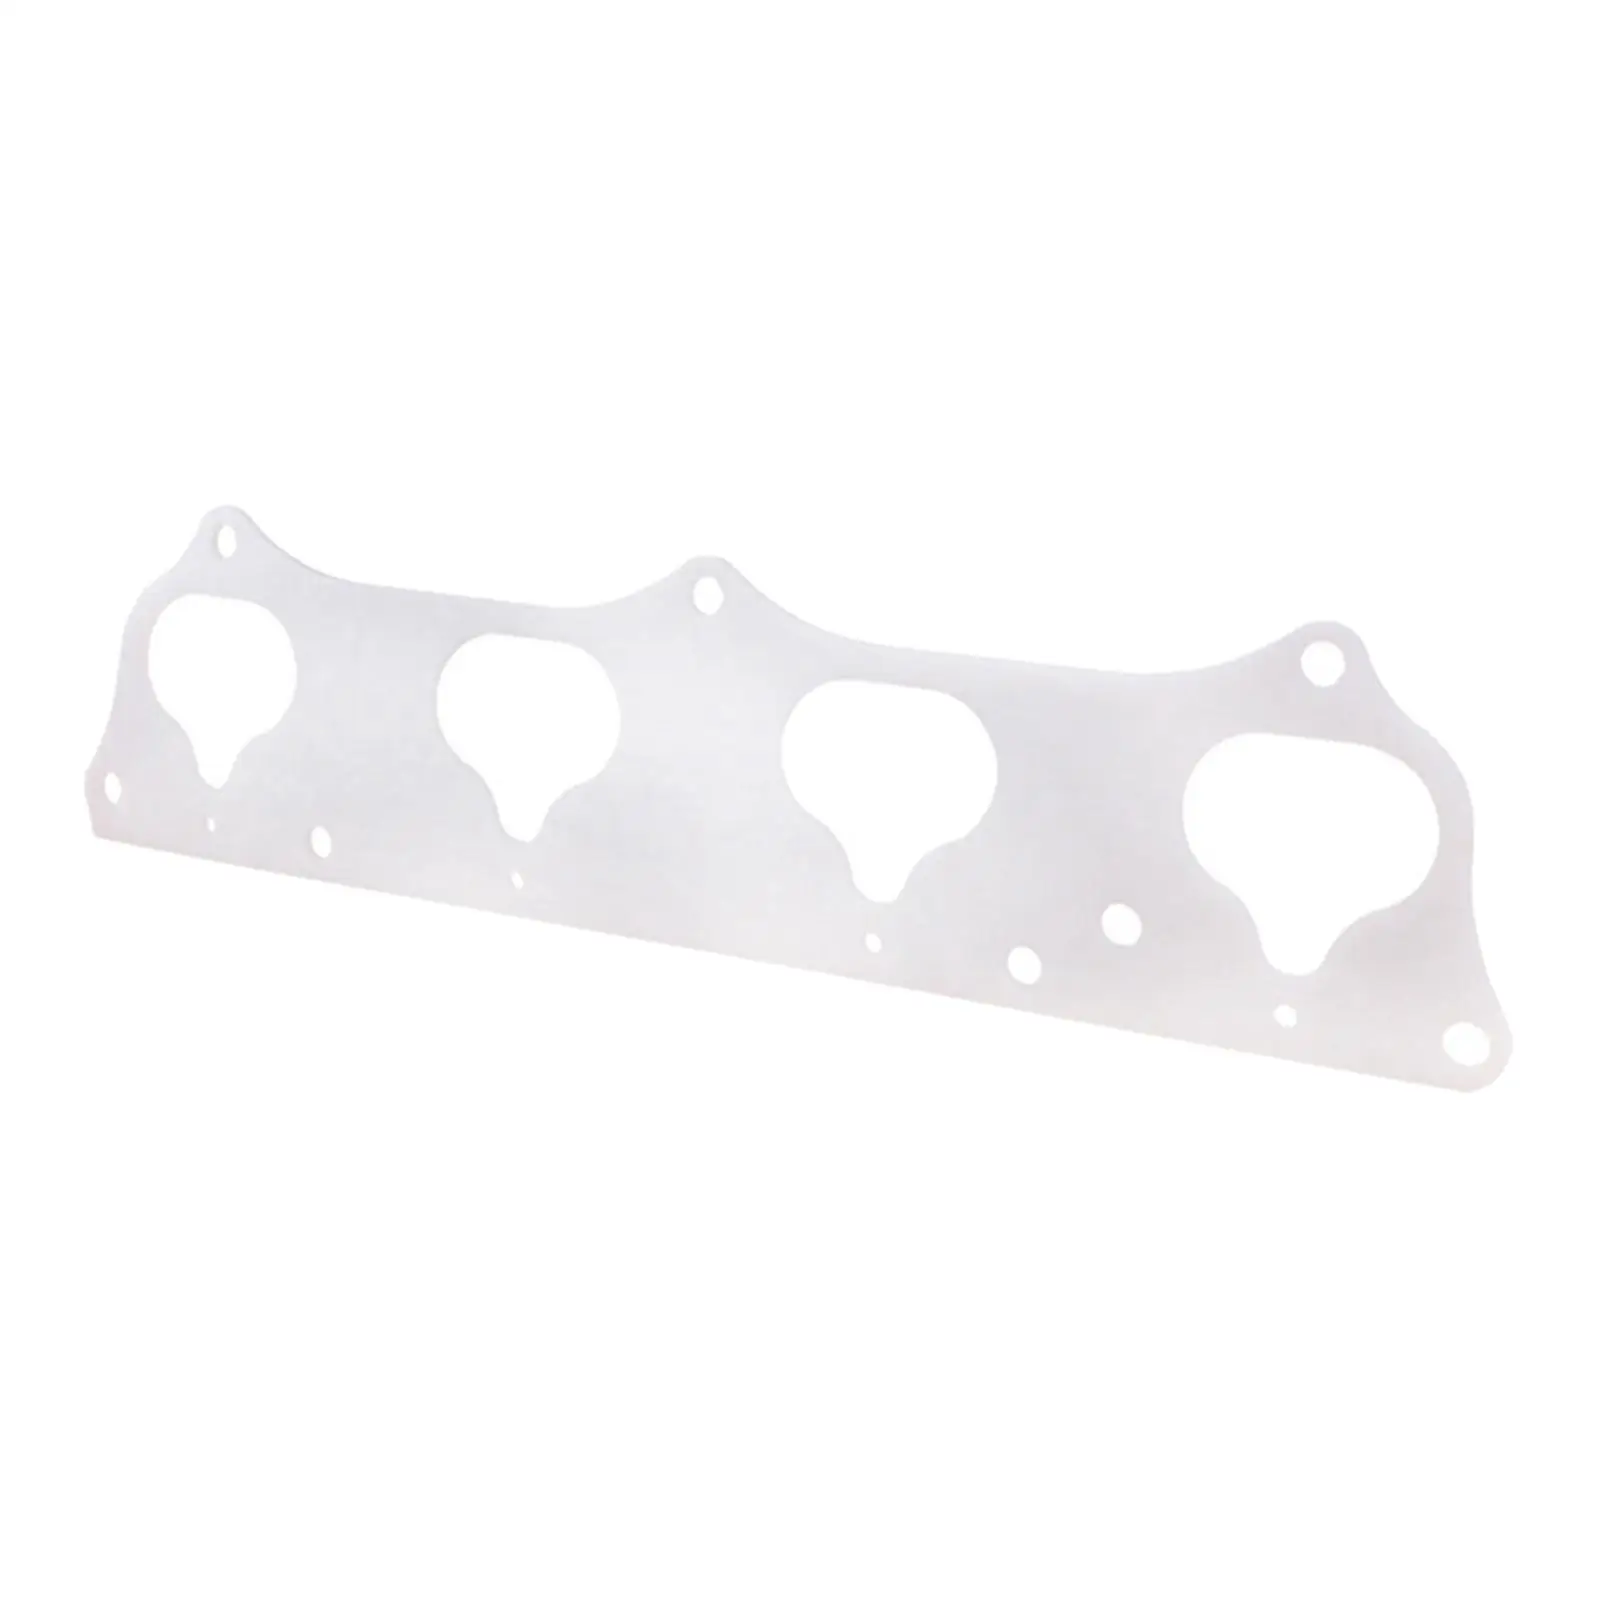 Car Thermal Intake Gasket Spare Parts High Performance Premium Durable Replaces